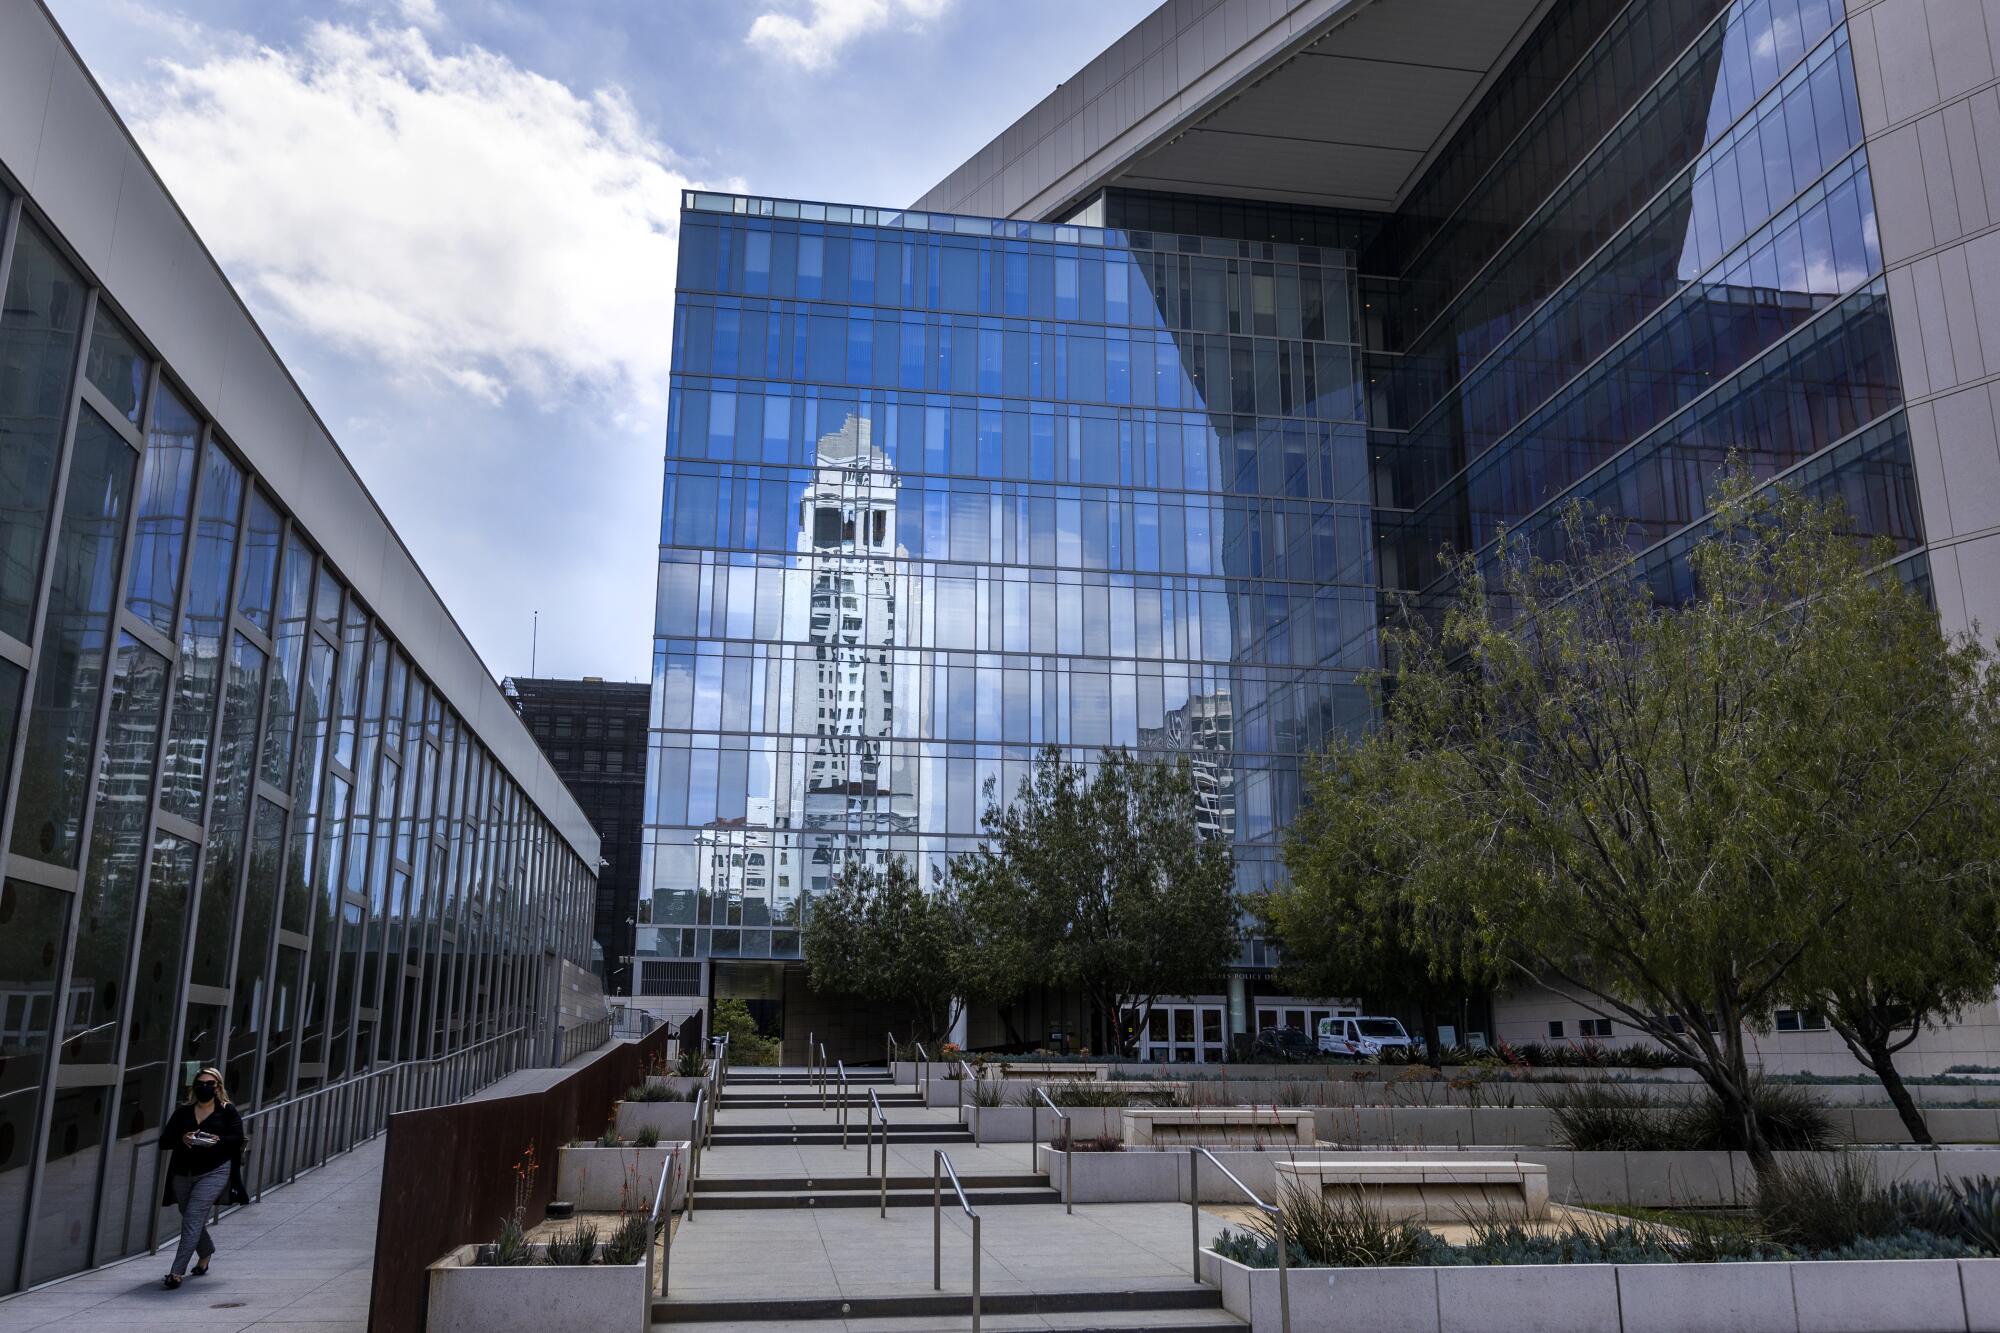 Los Angeles City Hall is reflected in the windows of the LAPD headquarters on April 20, 2022.